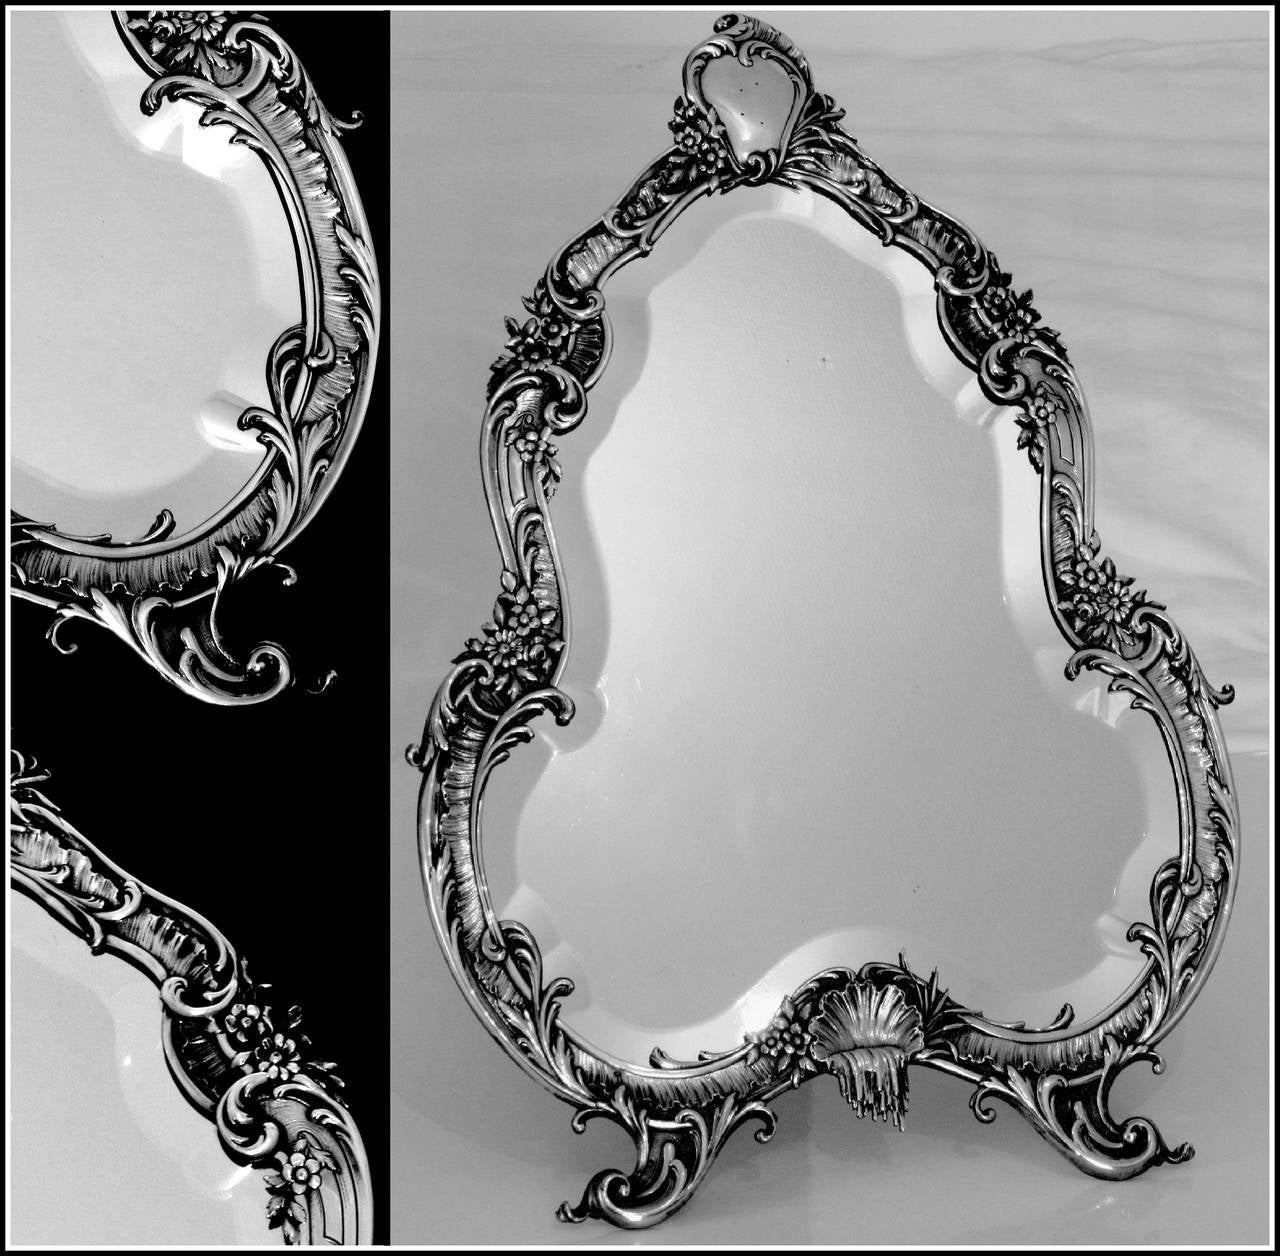 Imposing French Sterling Silver Vanity/Dressing Table Mirror 20'1 Rococo

Rare and imposing French Sterling Silver Vanity/Dressing Table mirror with exaggerated Rococo decoration.
Mounted onto a thick, solid wooden backing with folding easel. It